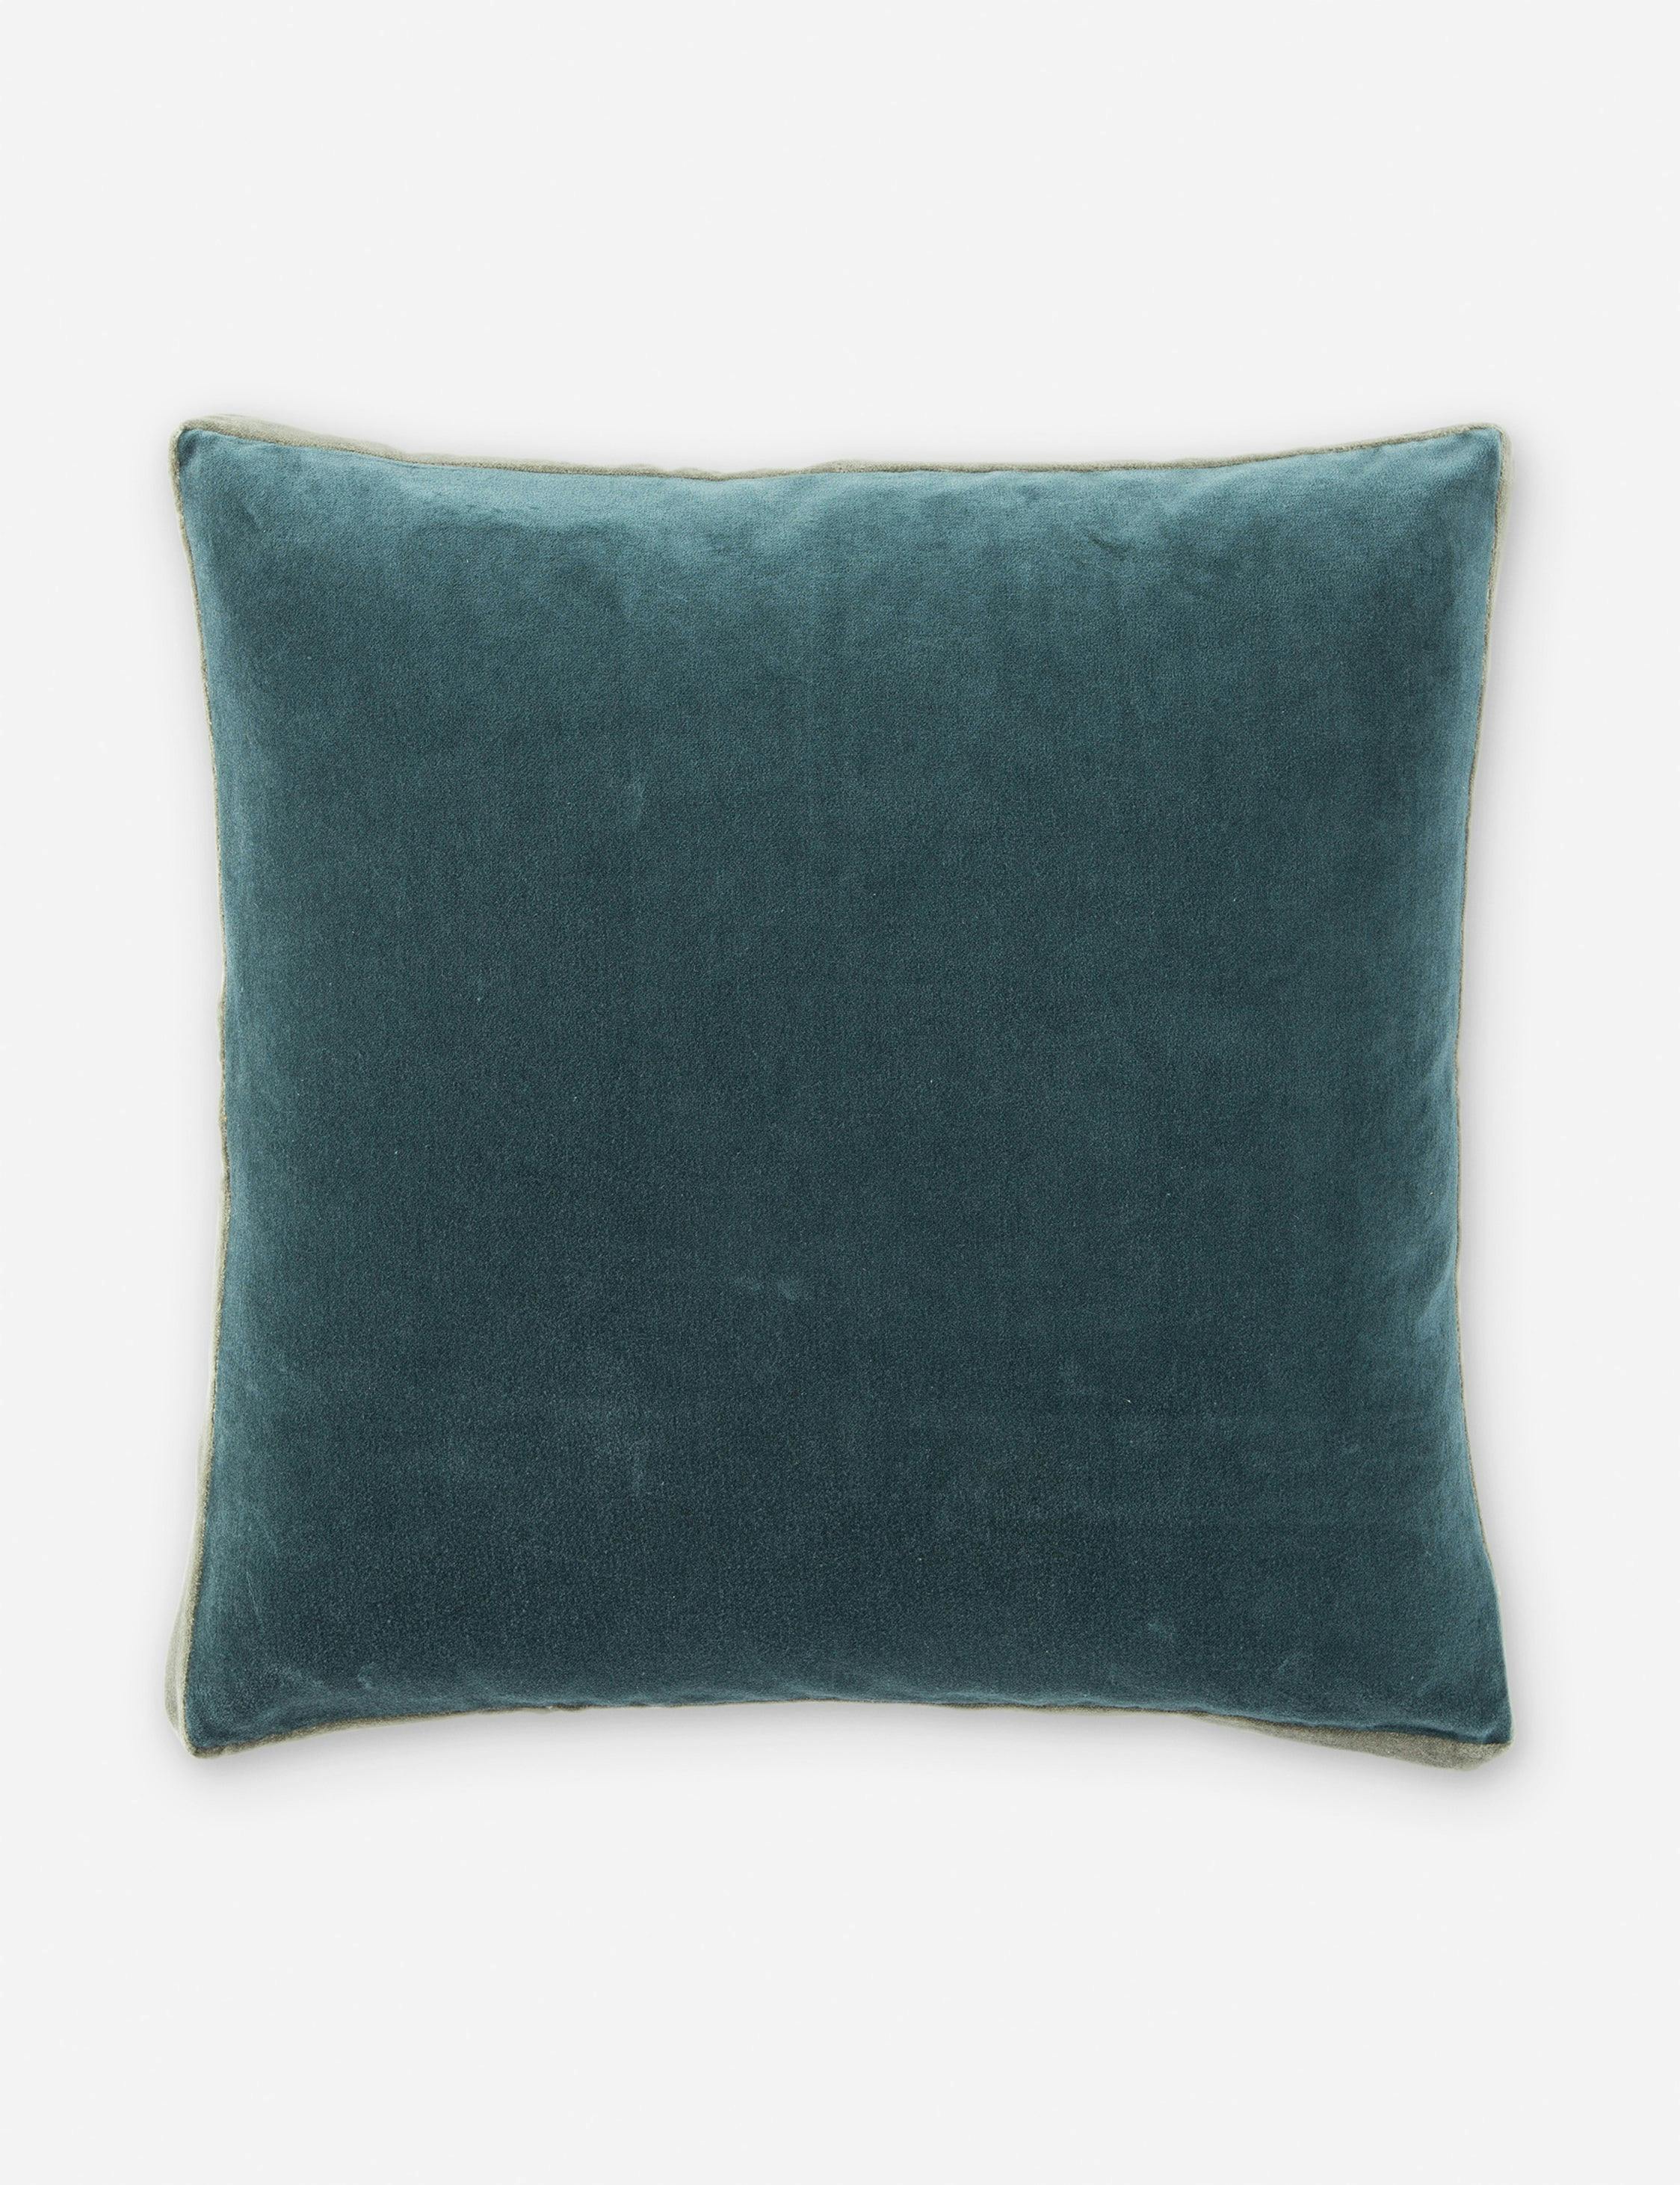 Teal and Gray Square Embroidered Velvet 18" Throw Pillow